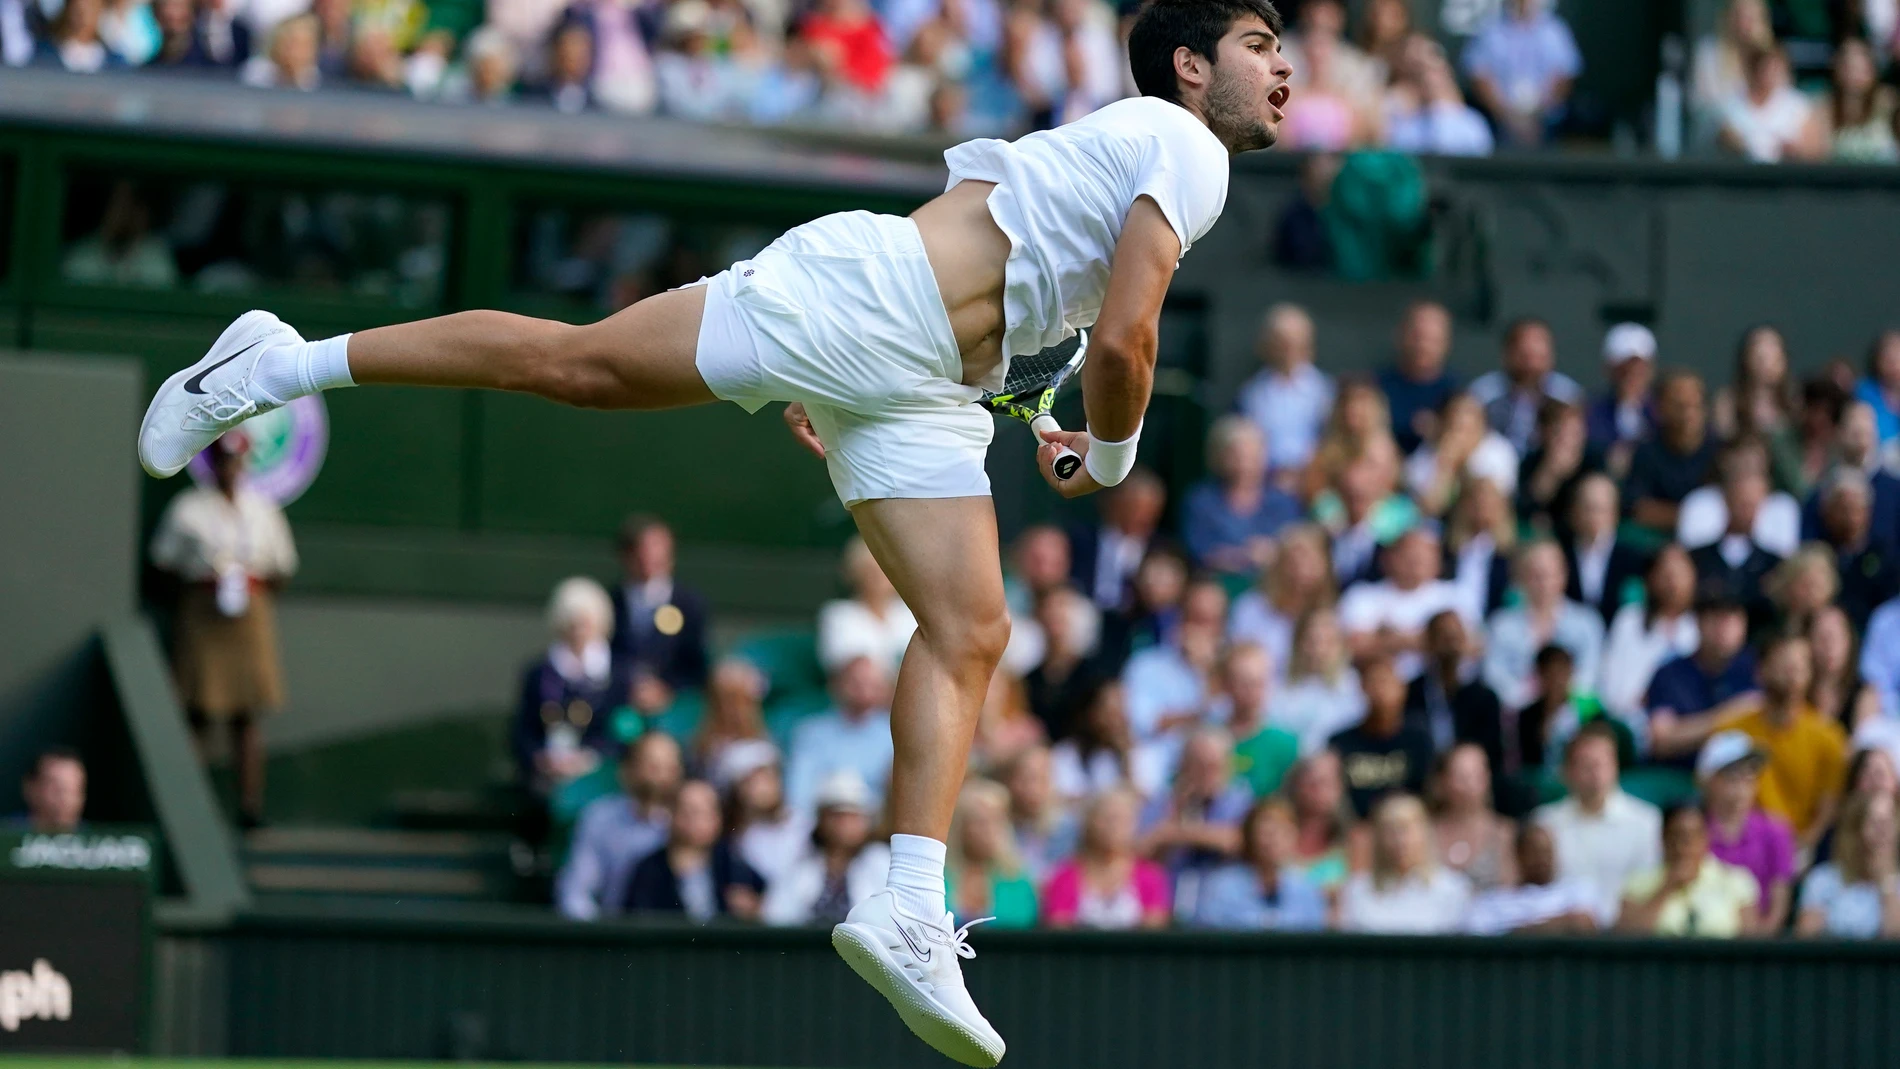 Spain's Carlos Alcaraz serves to Italy's Matteo Berrettini in a men's singles match on day eight of the Wimbledon tennis championships in London, Monday, July 10, 2023. (AP Photo/Alberto Pezzali)